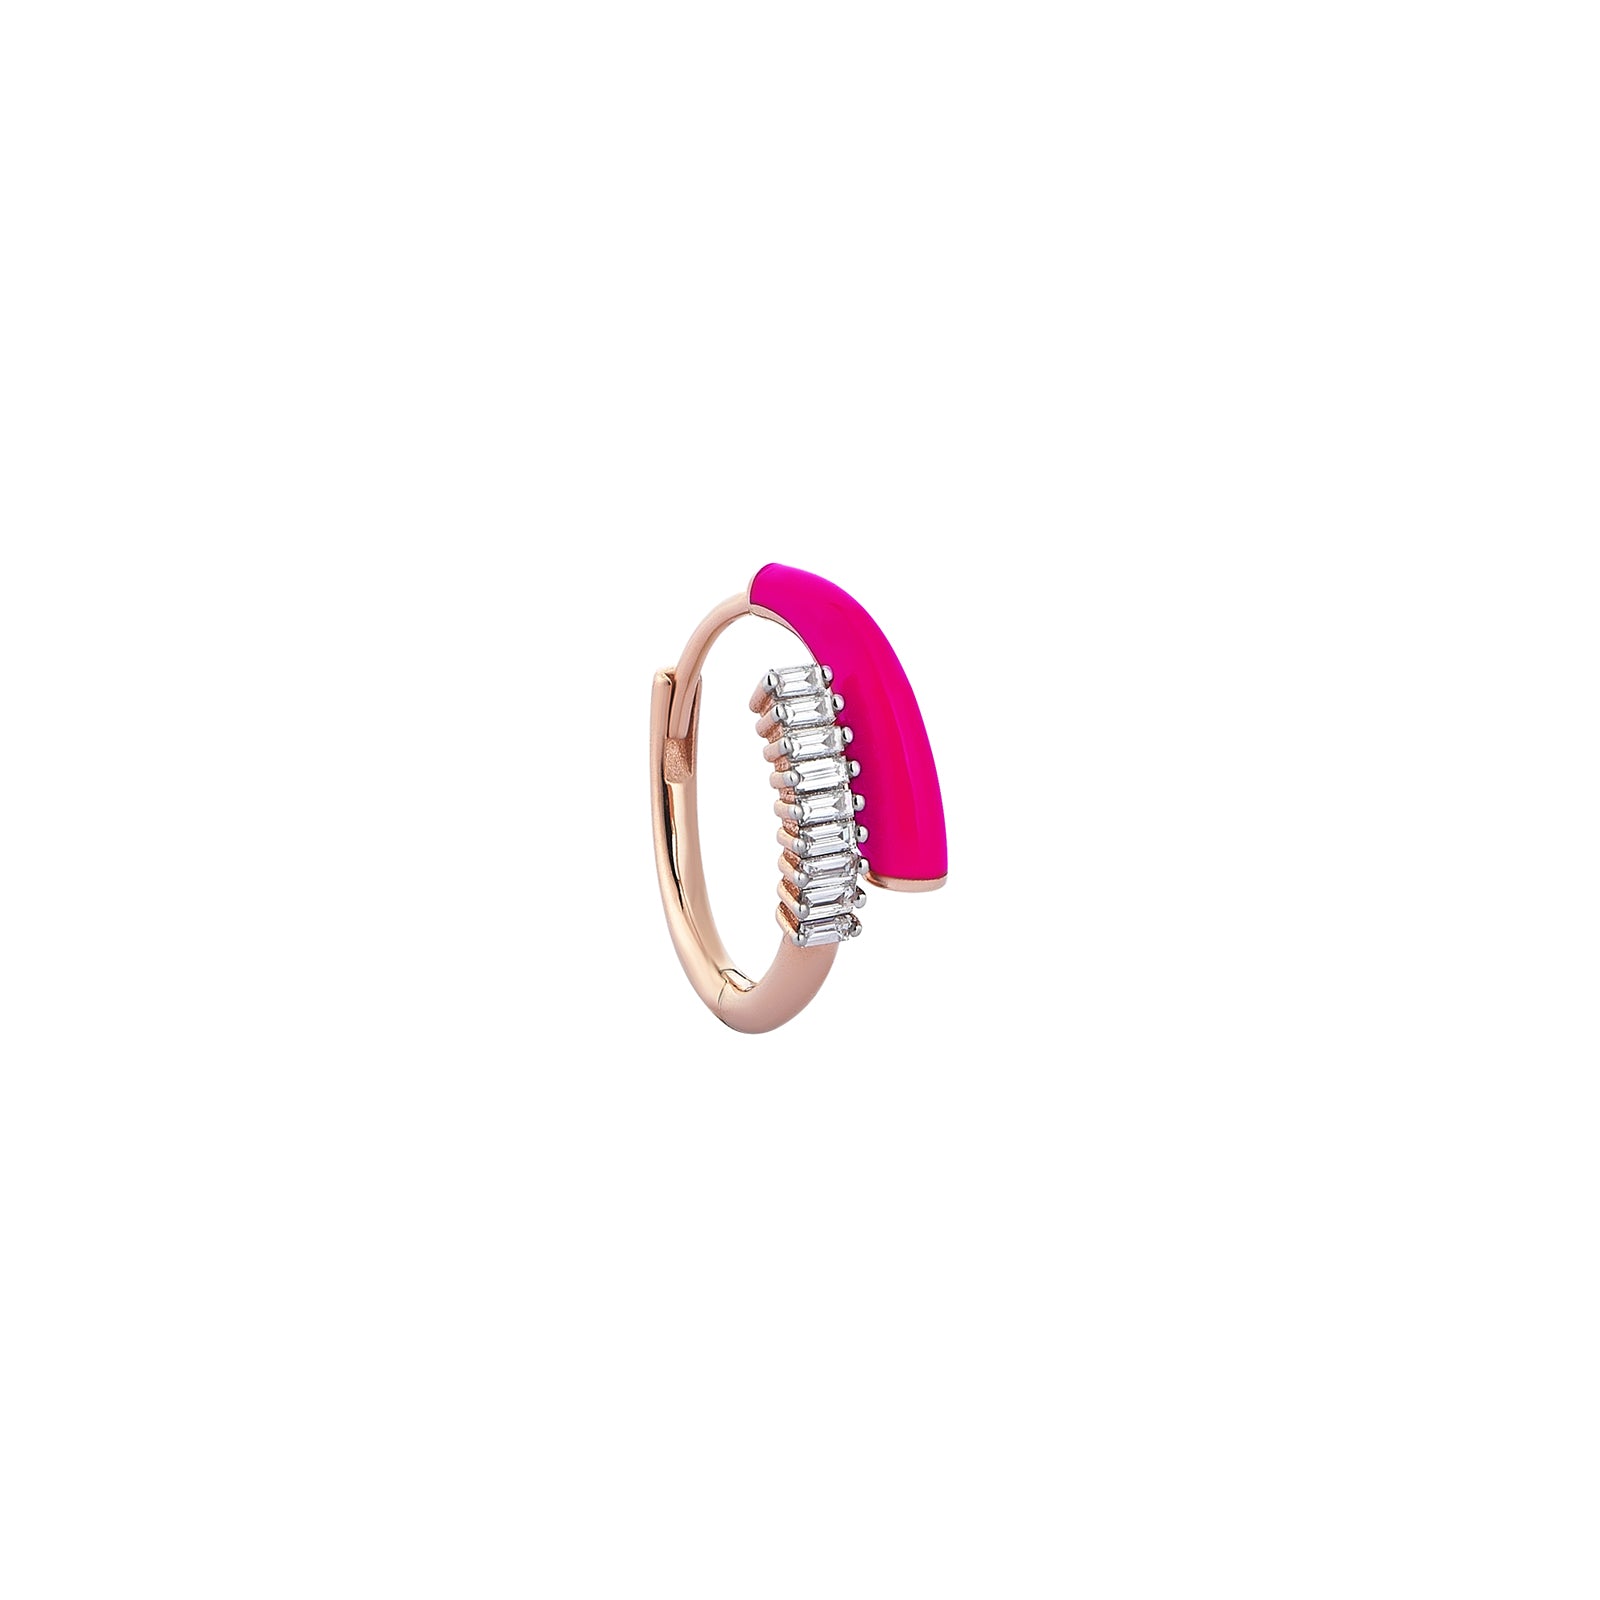 Oh Snap! Hoop Earring Roslow Gold / Baguette White Diamond and Pink Ceramic